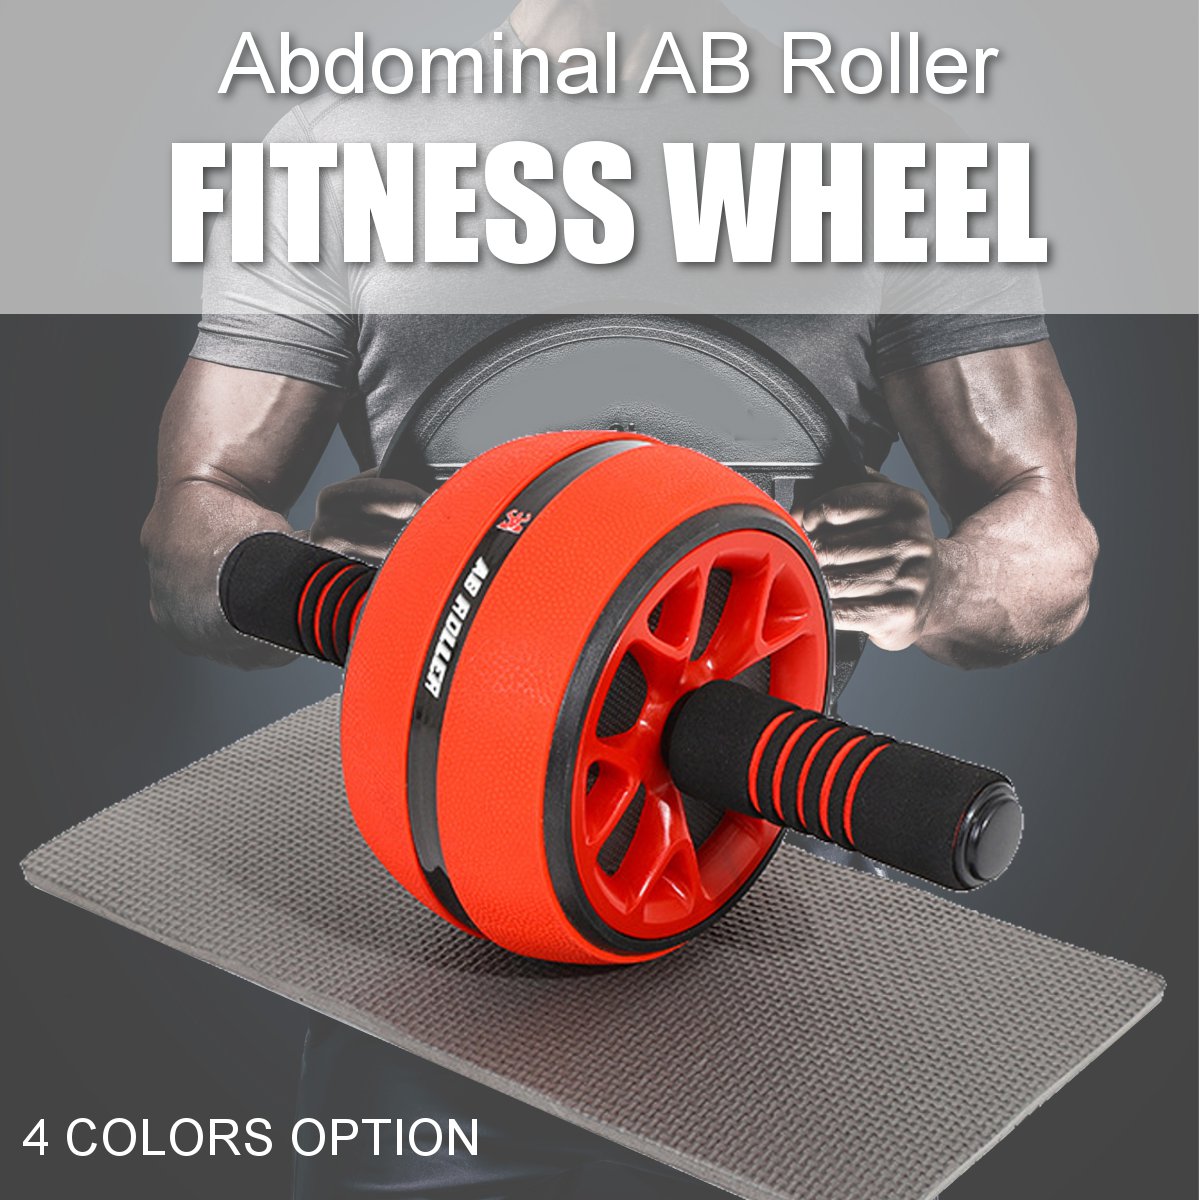 1PC-Wider-Ab-Roller-Wheel-With-Knee-Pad-for-Core-Training-Abdominal-Workout-Fitness-Exercise-Tools-1669168-1